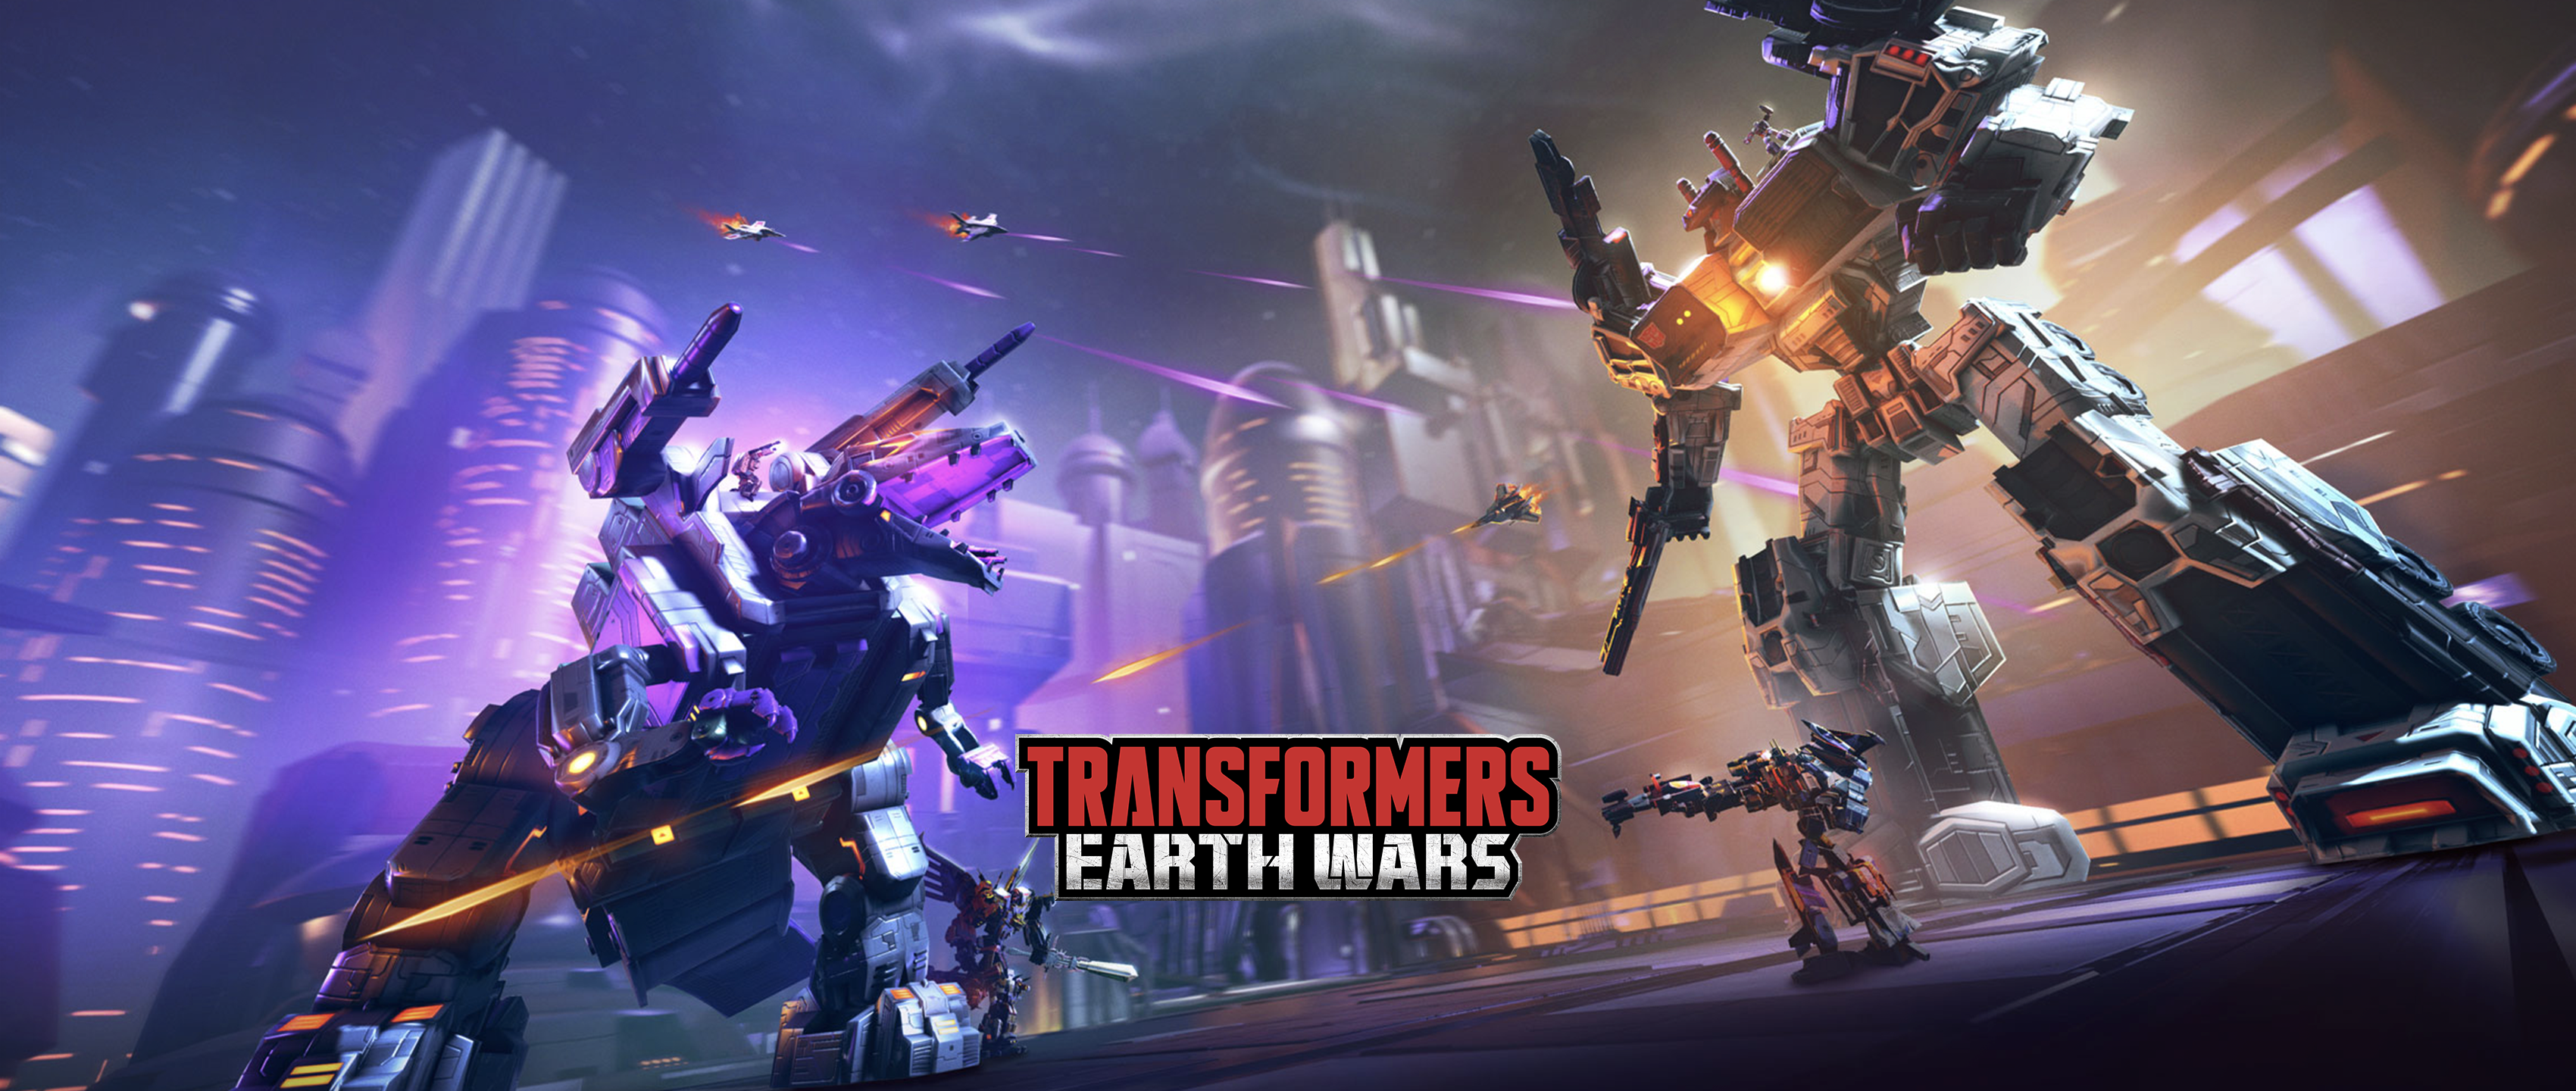 New Transformers Earth Wars Loading Screen And Details For Weekend Event Planet Terror - loading screen brawl stars home screen